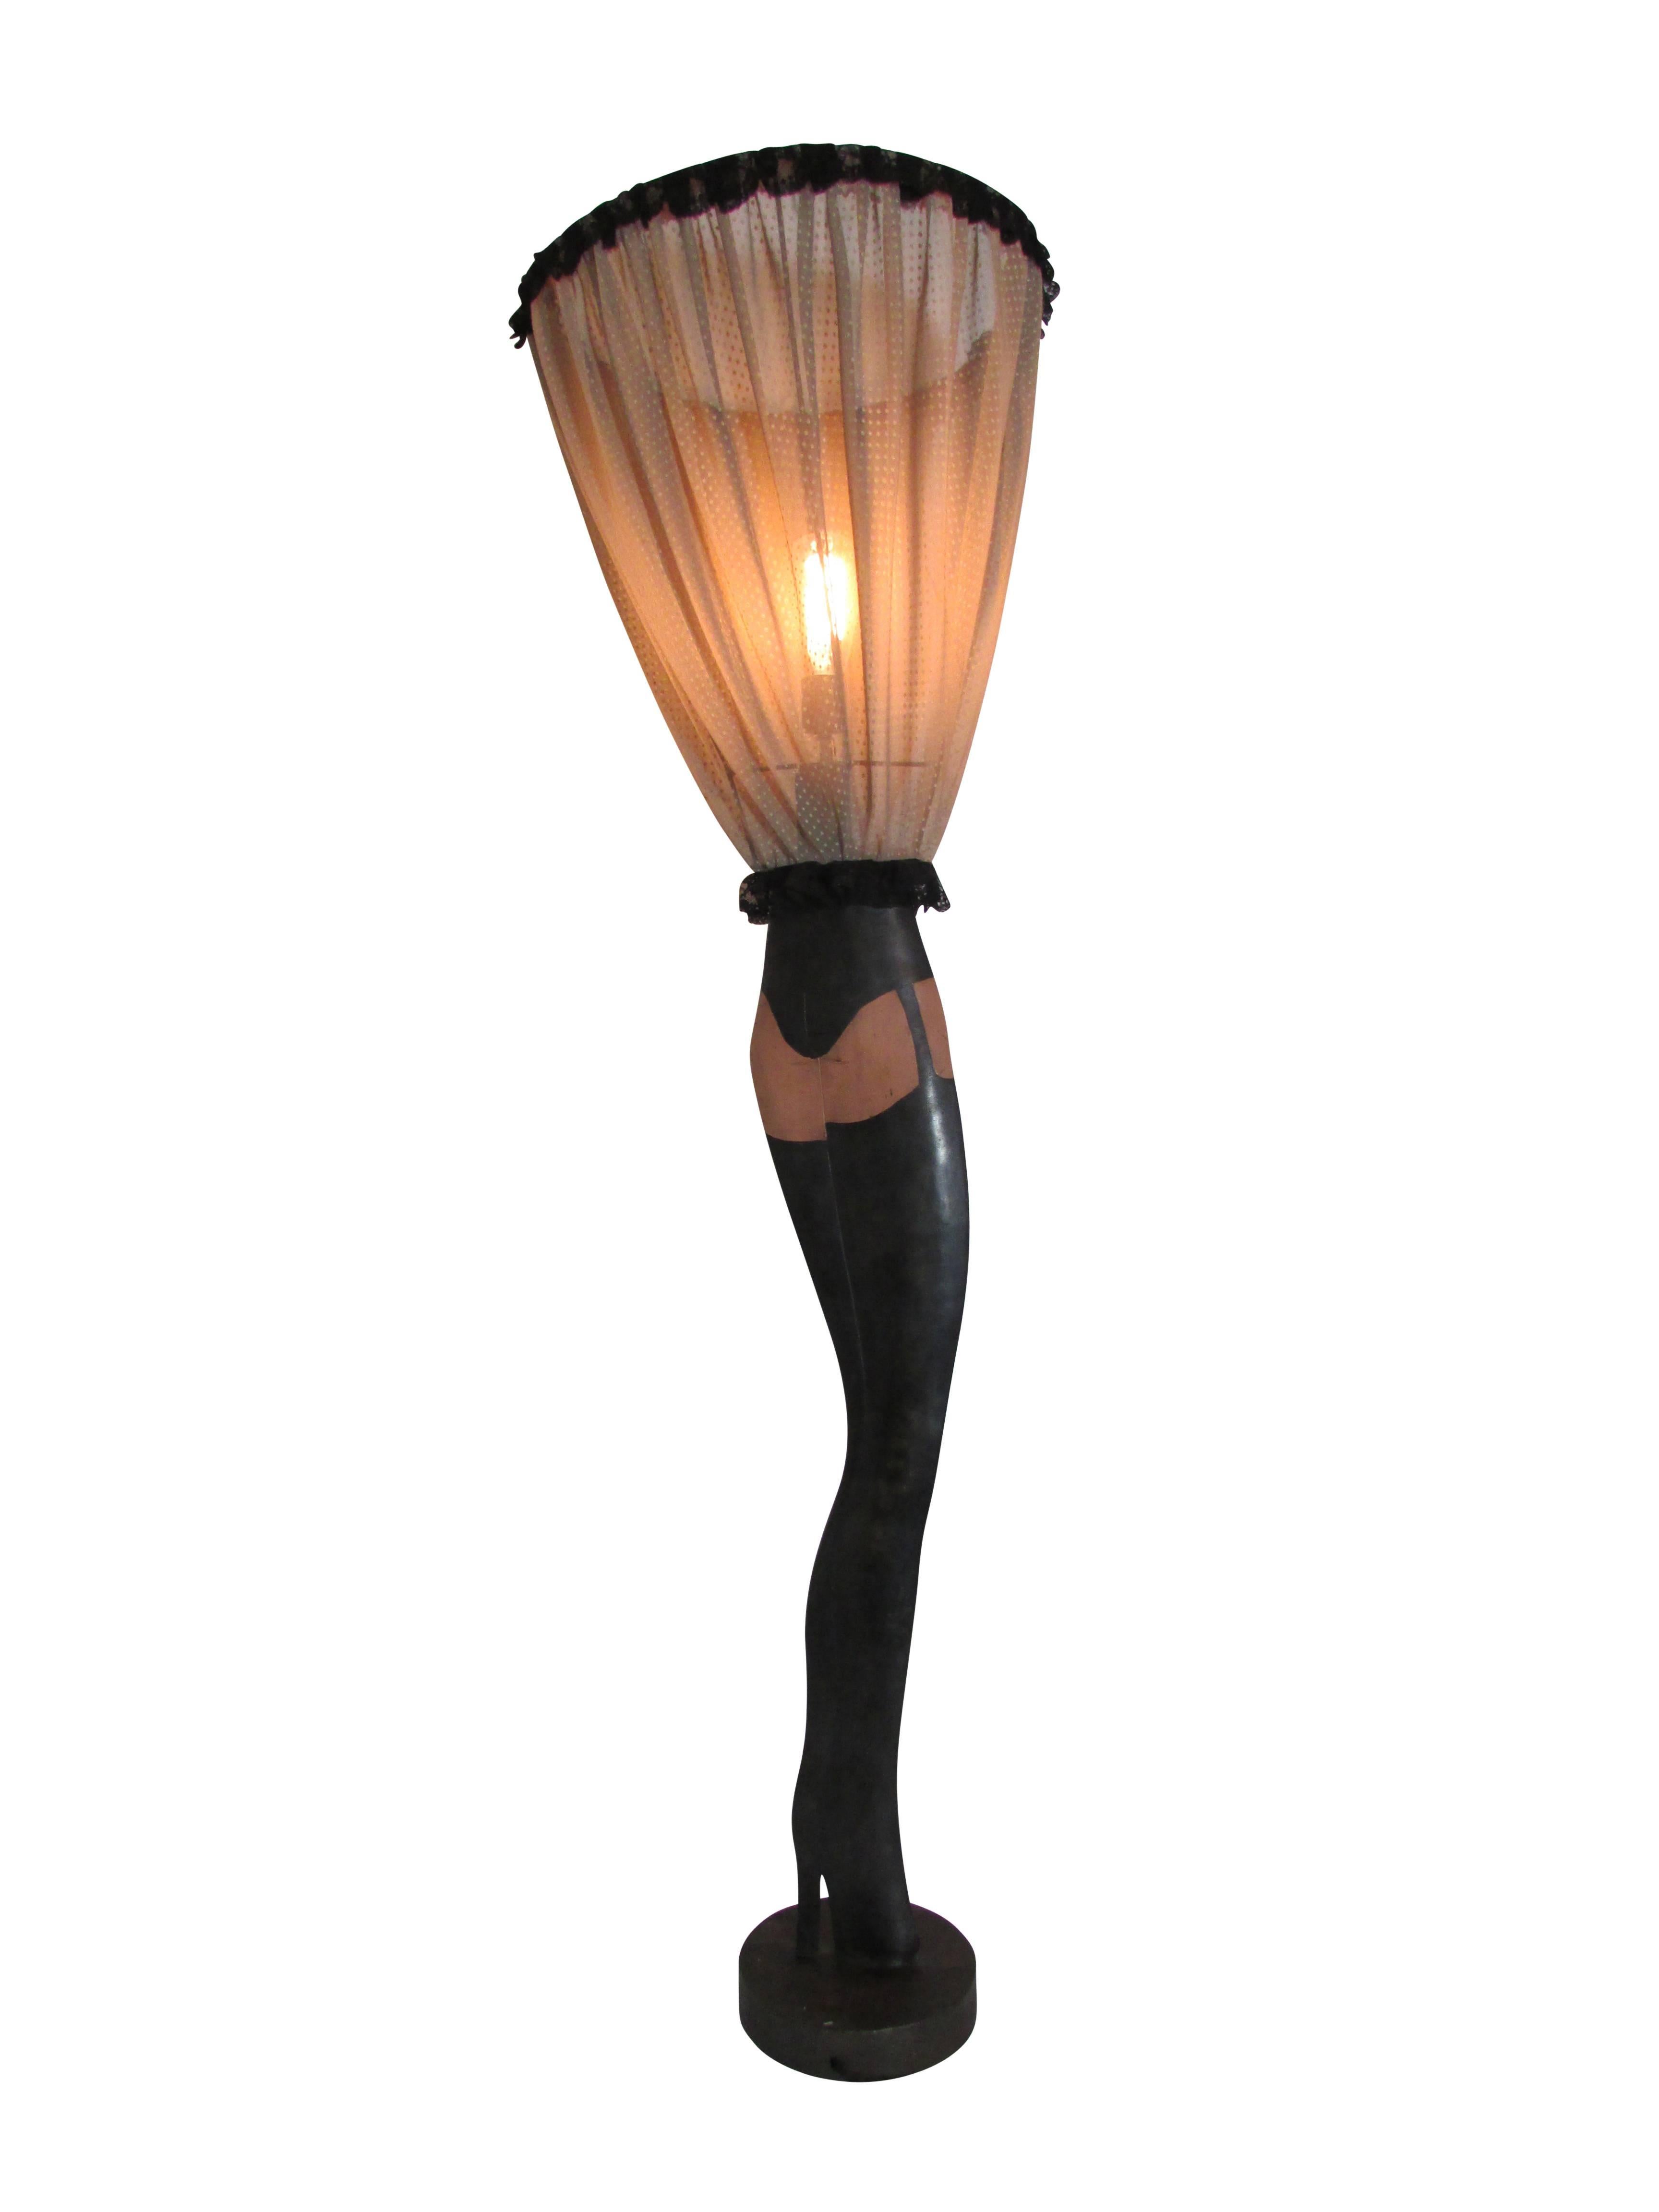 This is a fantastic double-sided floor lamp in the form of a woman's legs, with the original lampshade as her blown up skirt. Made of sculpted steel, then cleverly painted with thigh high stockings complete with garter and panties. Oh là là!!